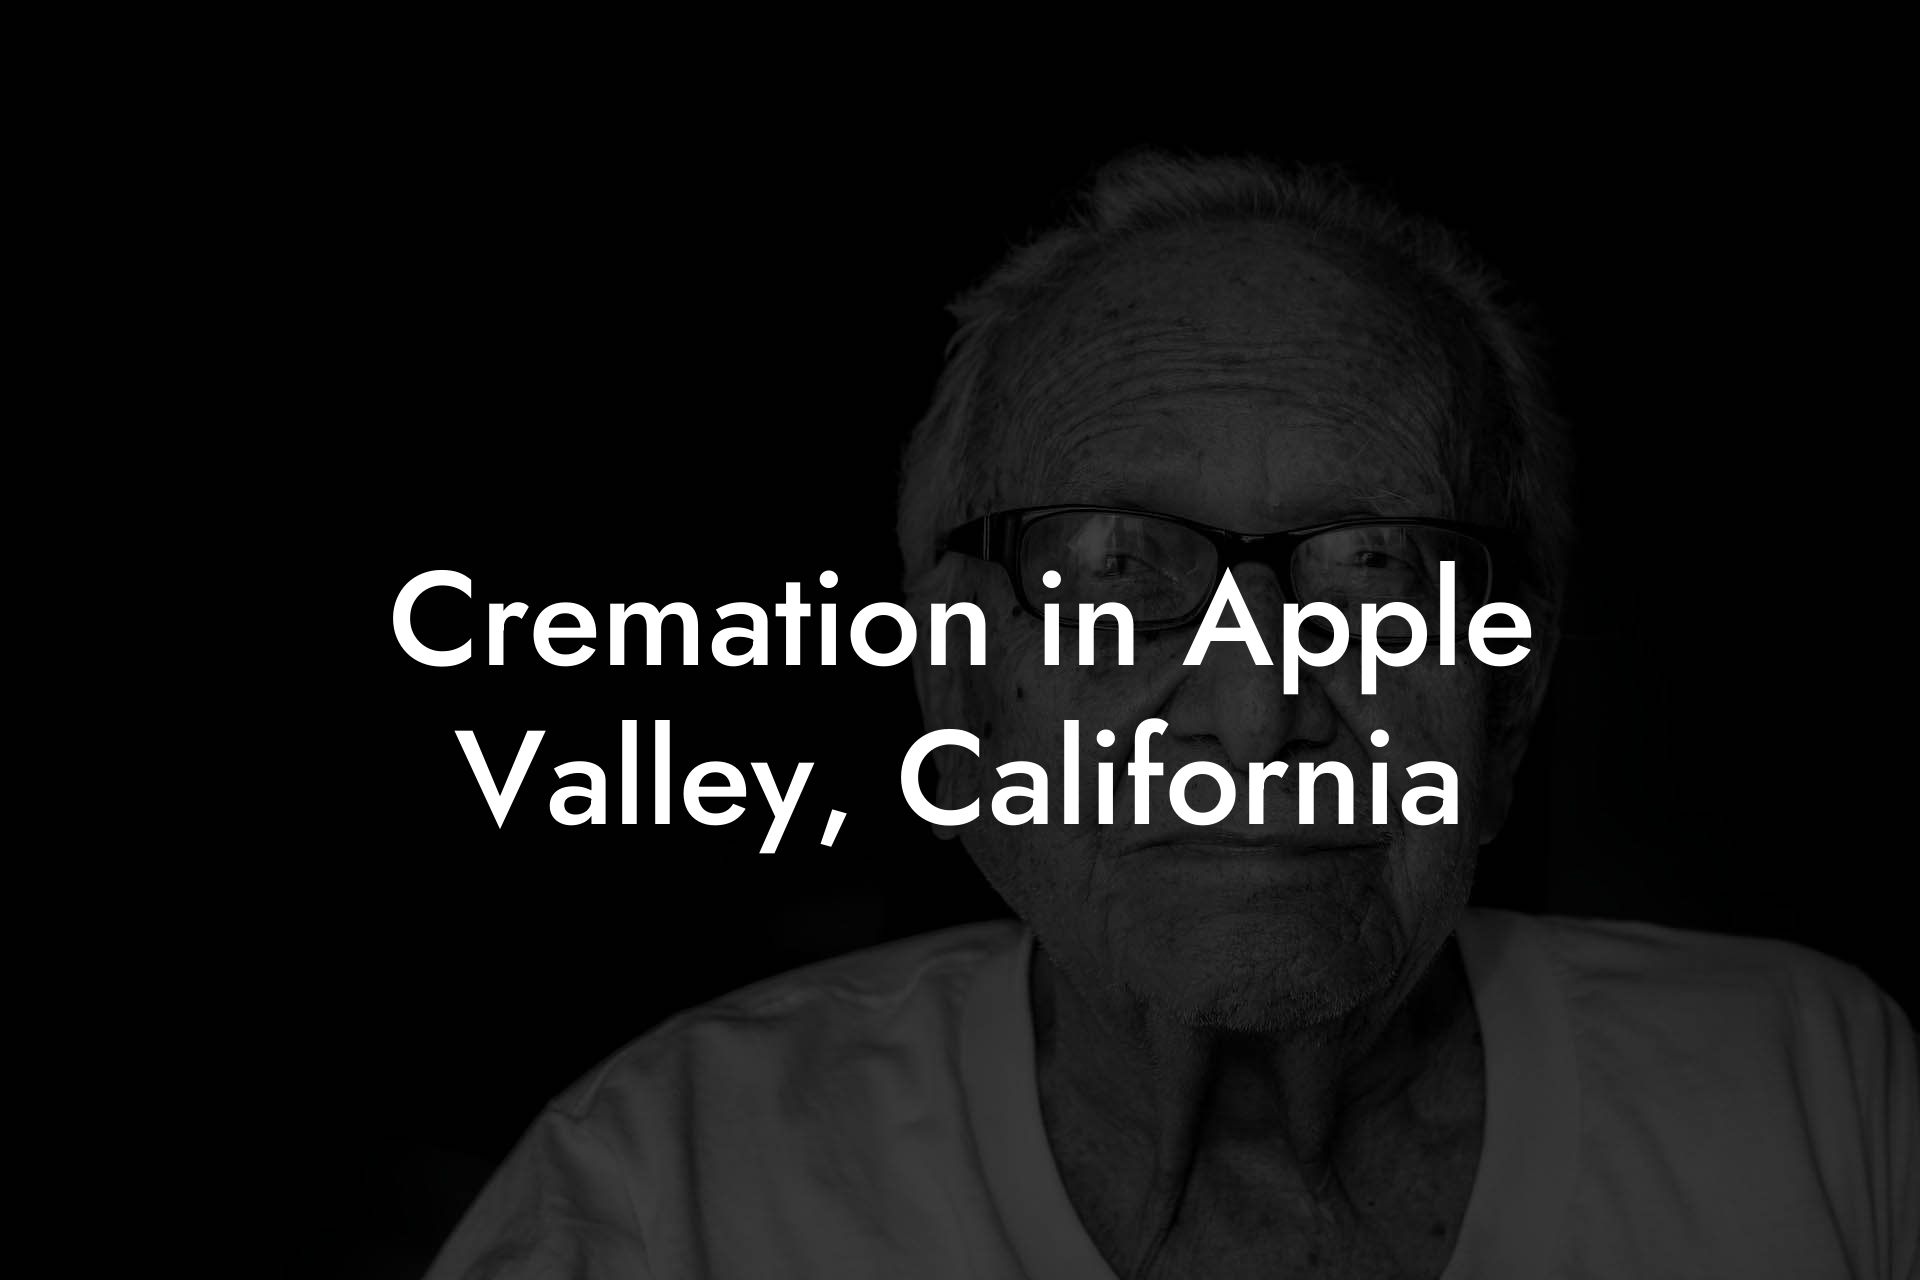 Cremation in Apple Valley, California